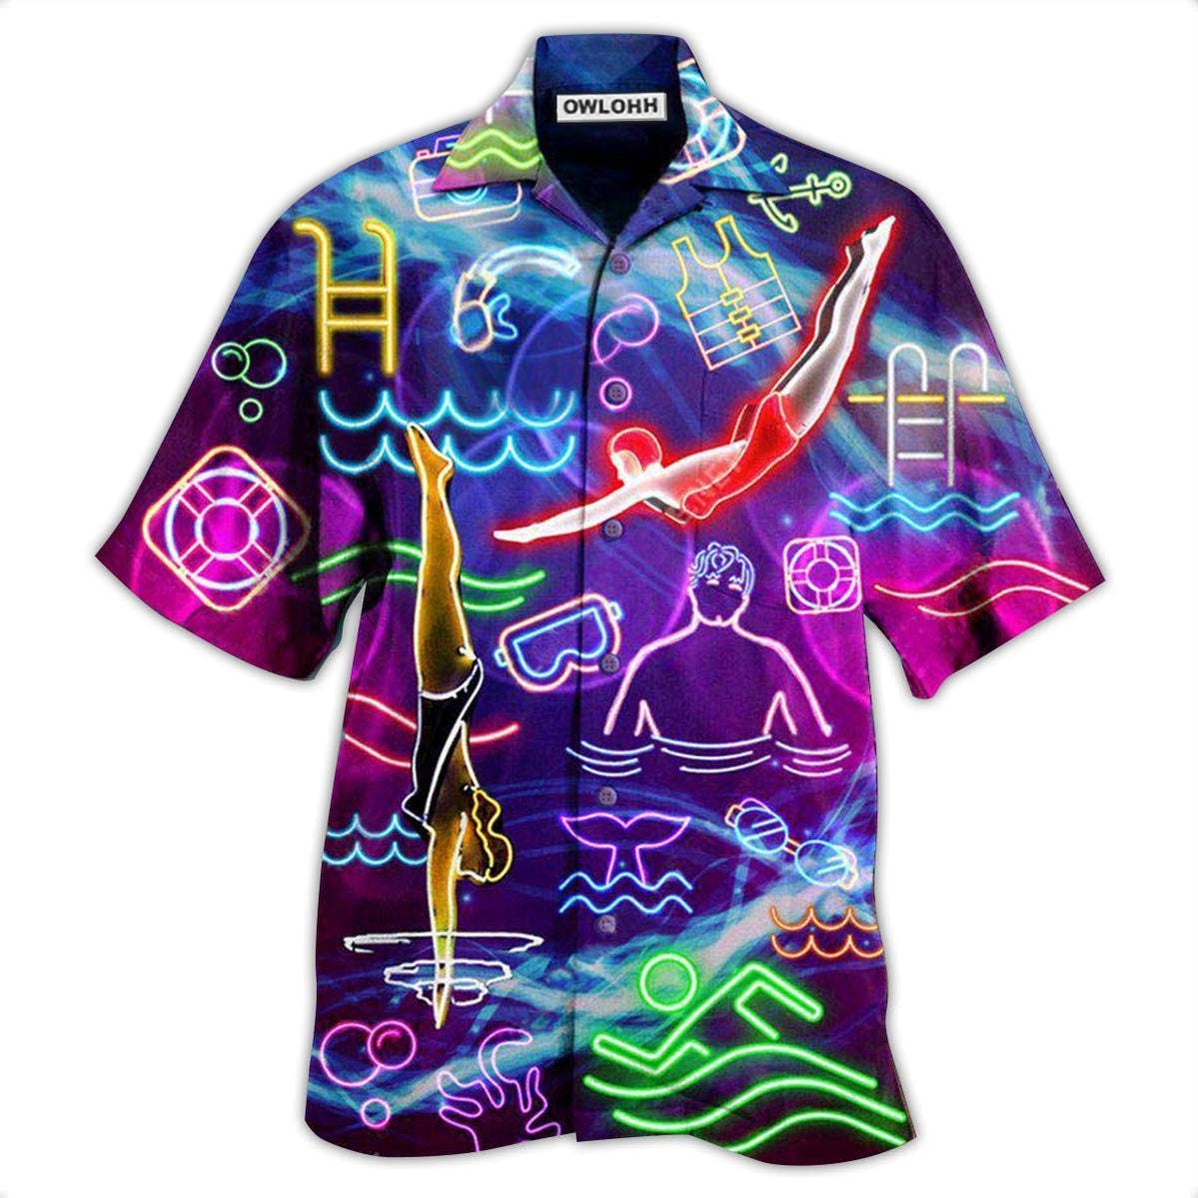 Hawaiian Shirt / Adults / S Swimming With Your Heart Swimming - Hawaiian Shirt - Owls Matrix LTD